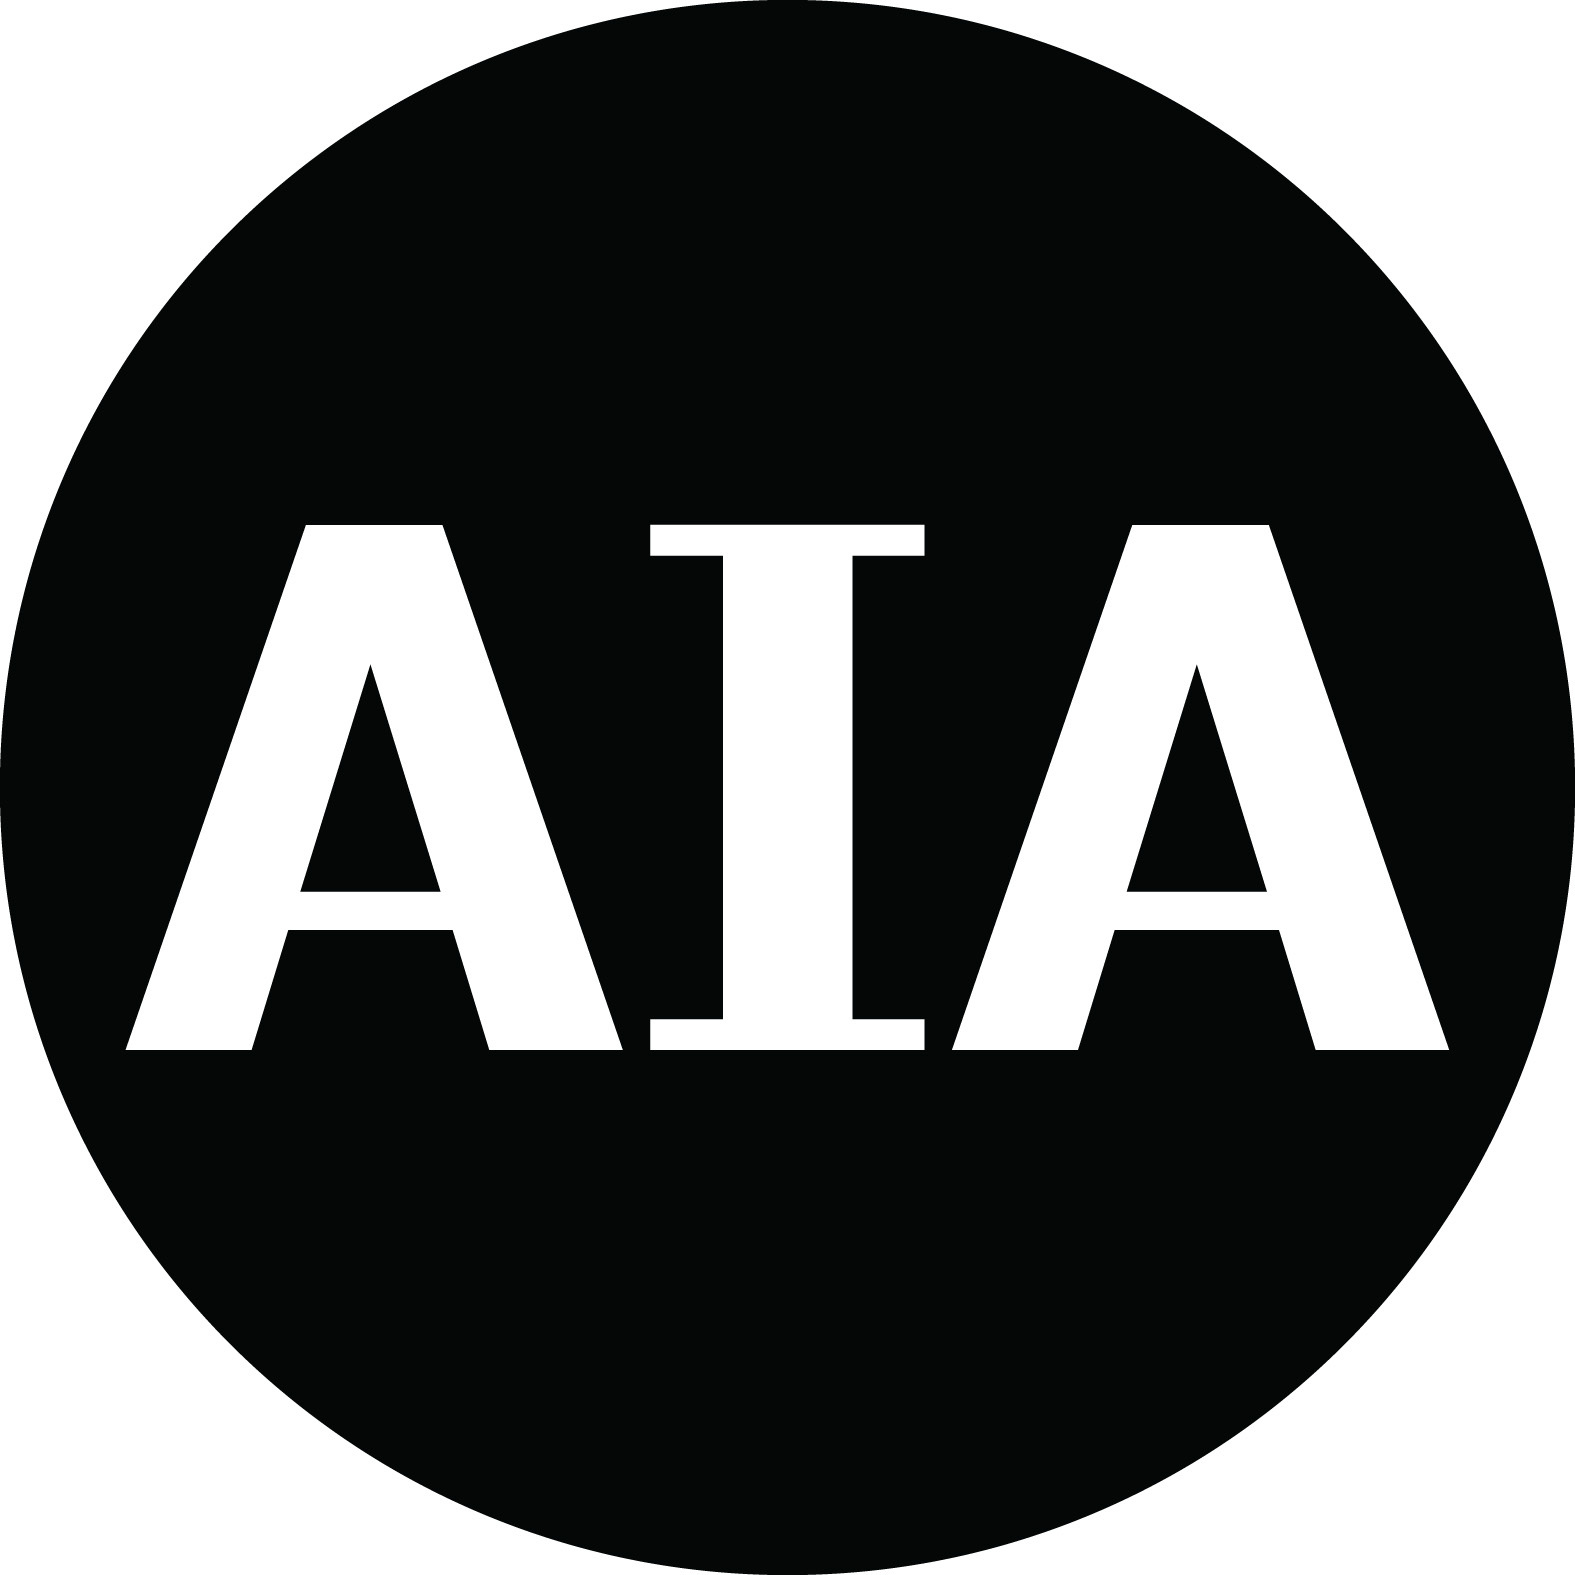 AIA selects recipients for the 2022 Collaborative Achievement Award